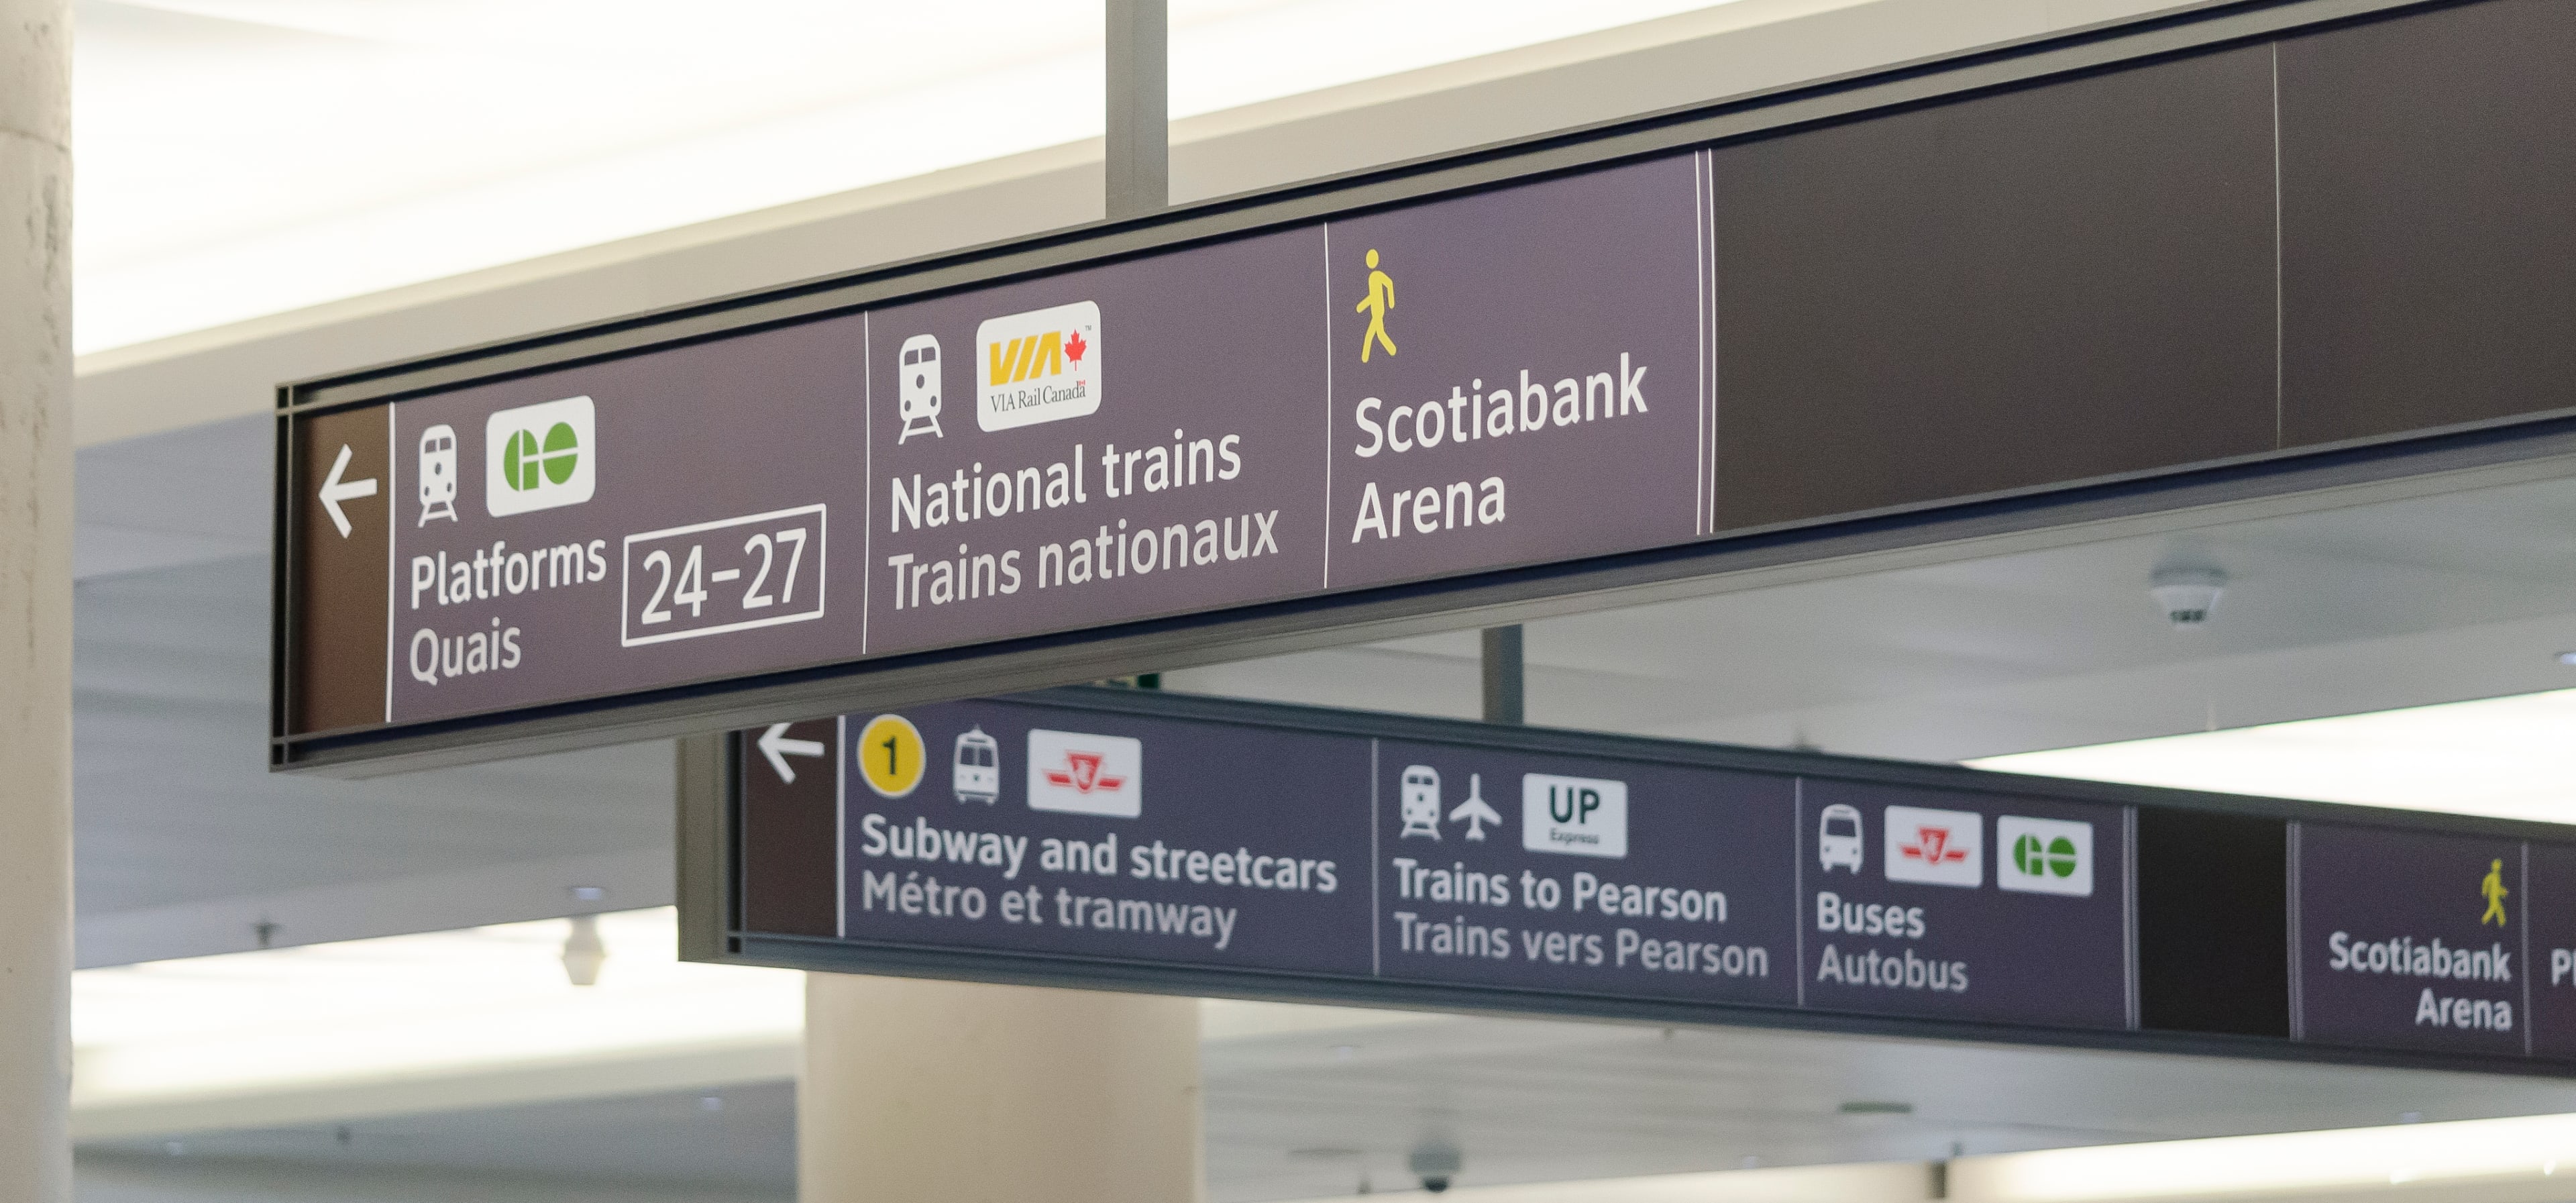 new wayfinding signs inside Union Station showing directions to GO platforms, VIA and TTC